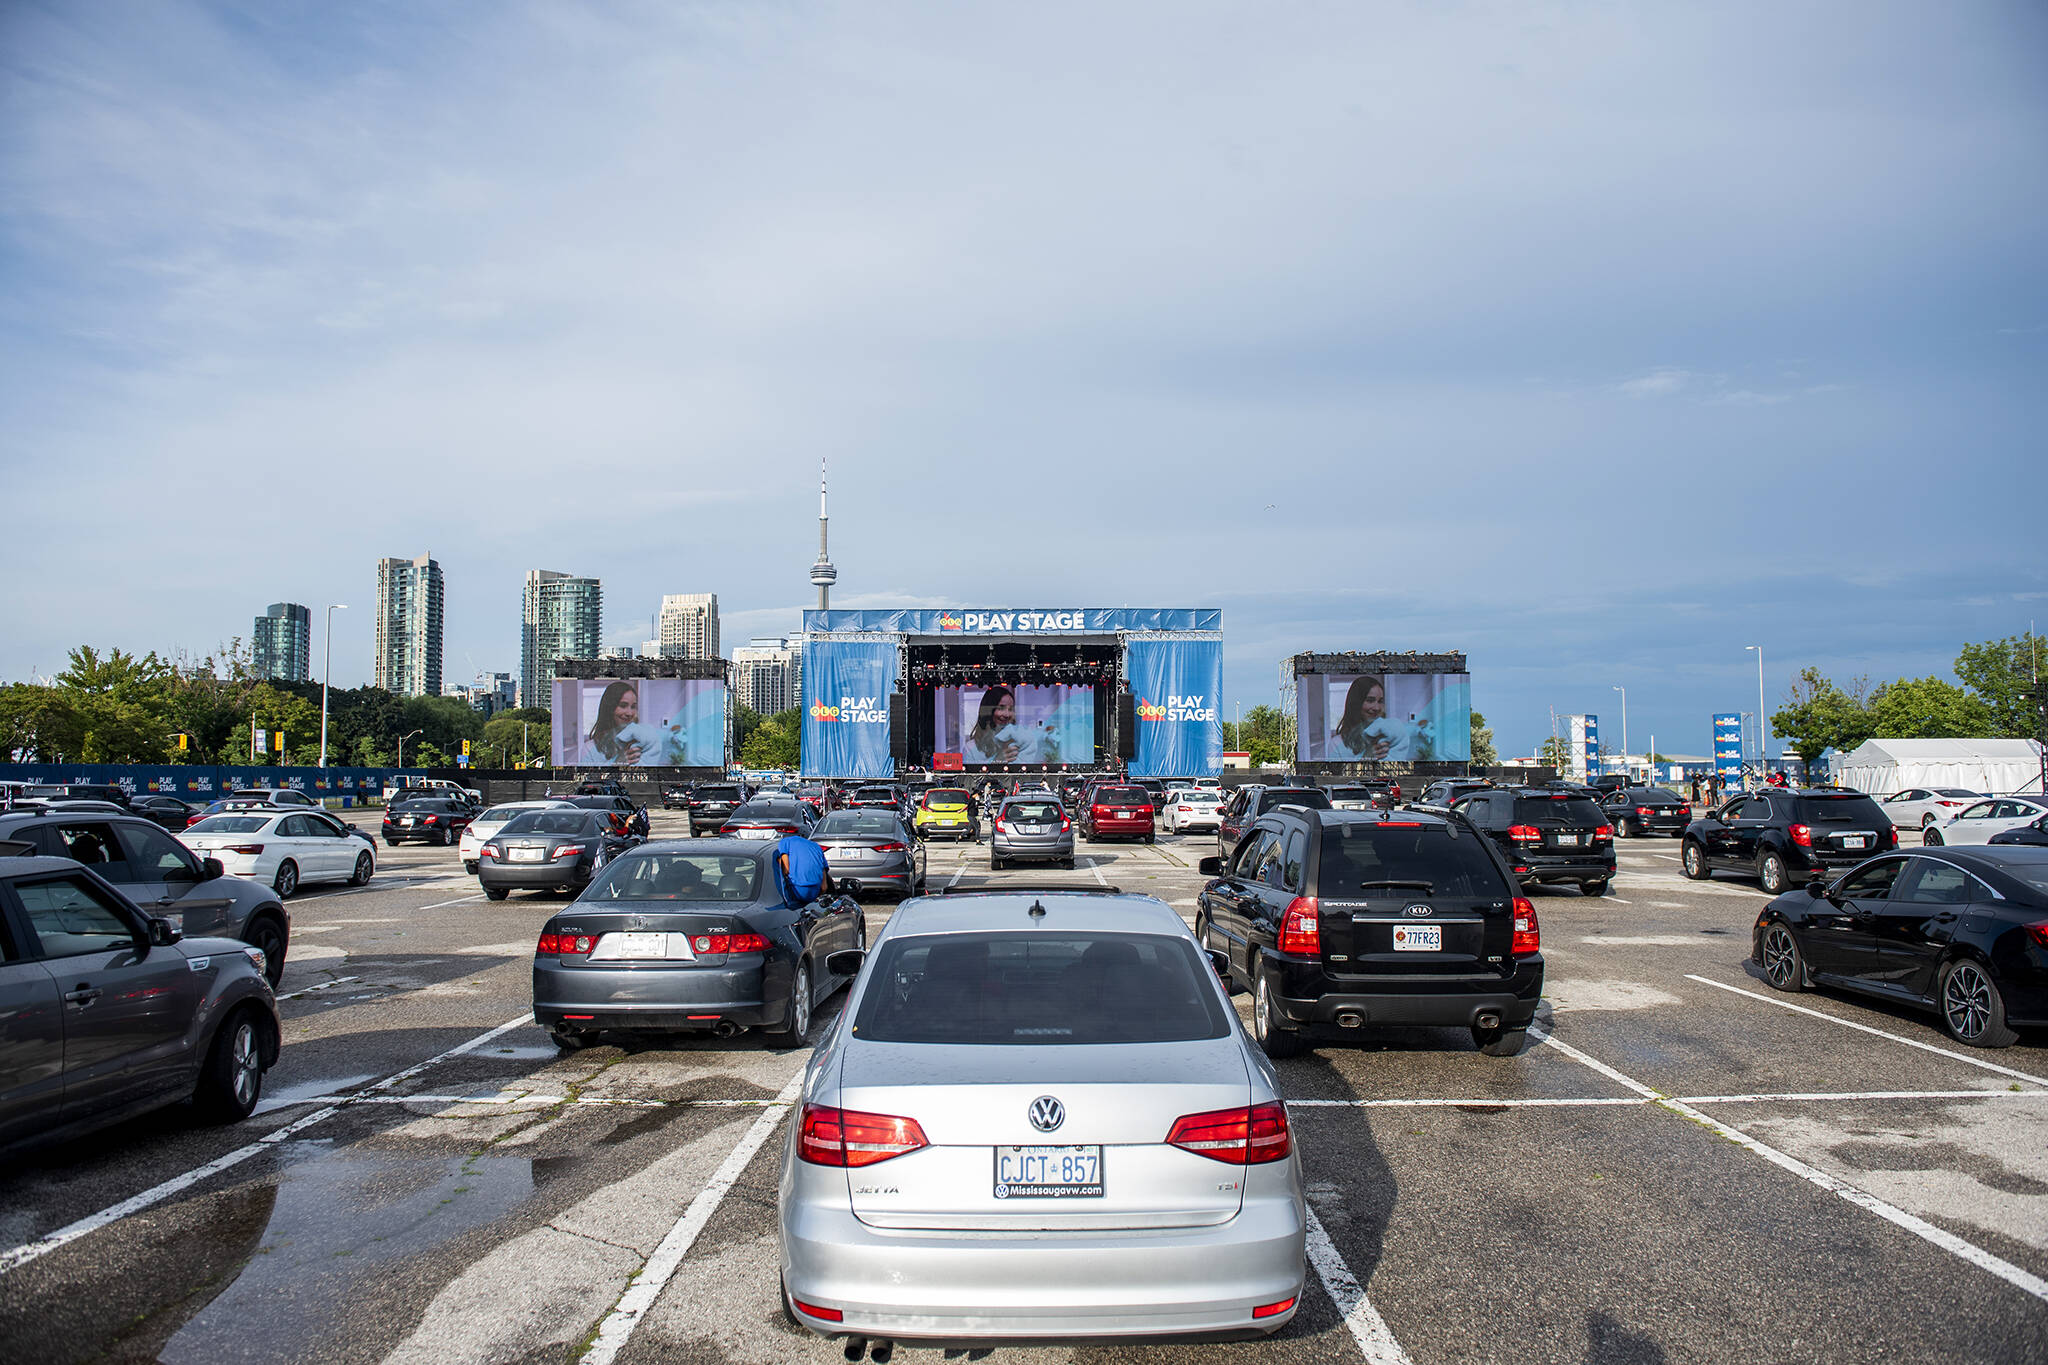 ontario place drive in